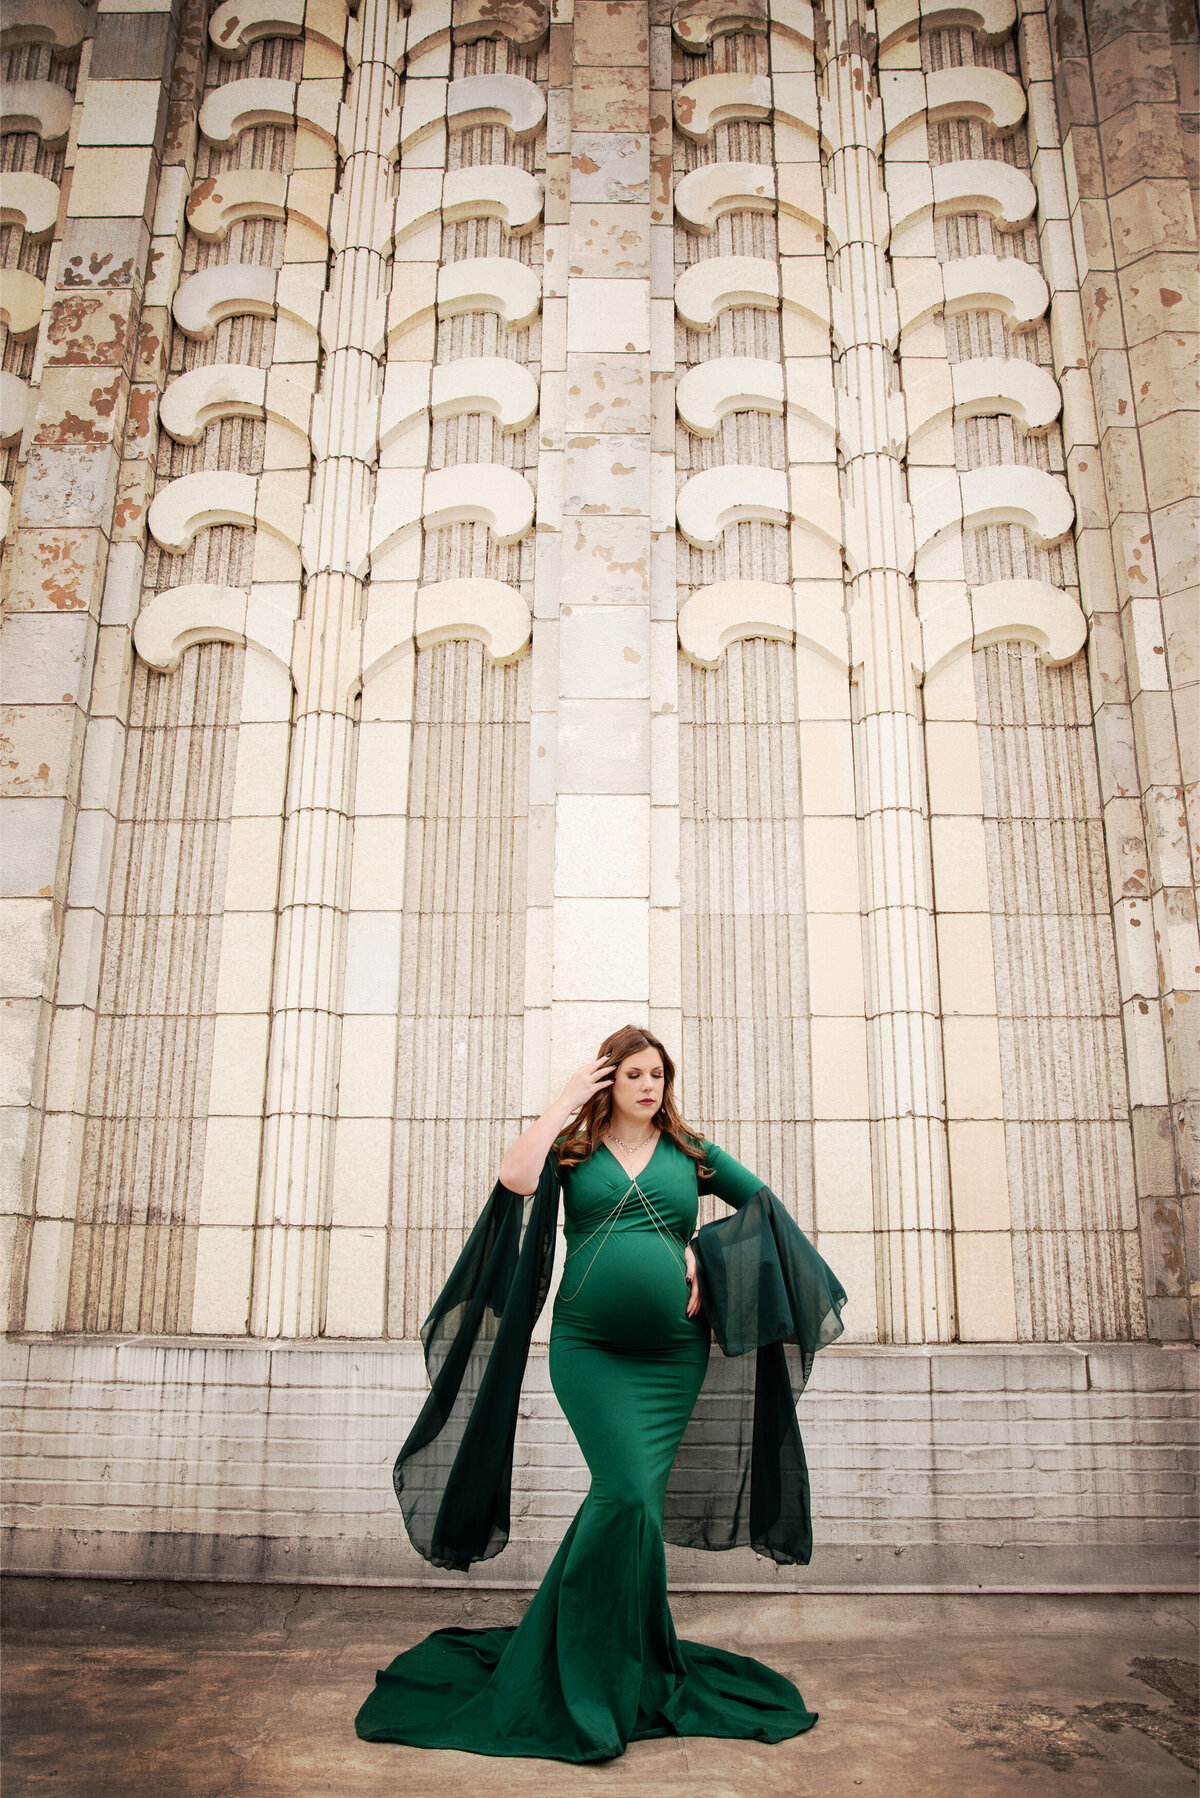 st-louis-maternity-photographer-mom-in-green-gown-in-front-of-large-wall